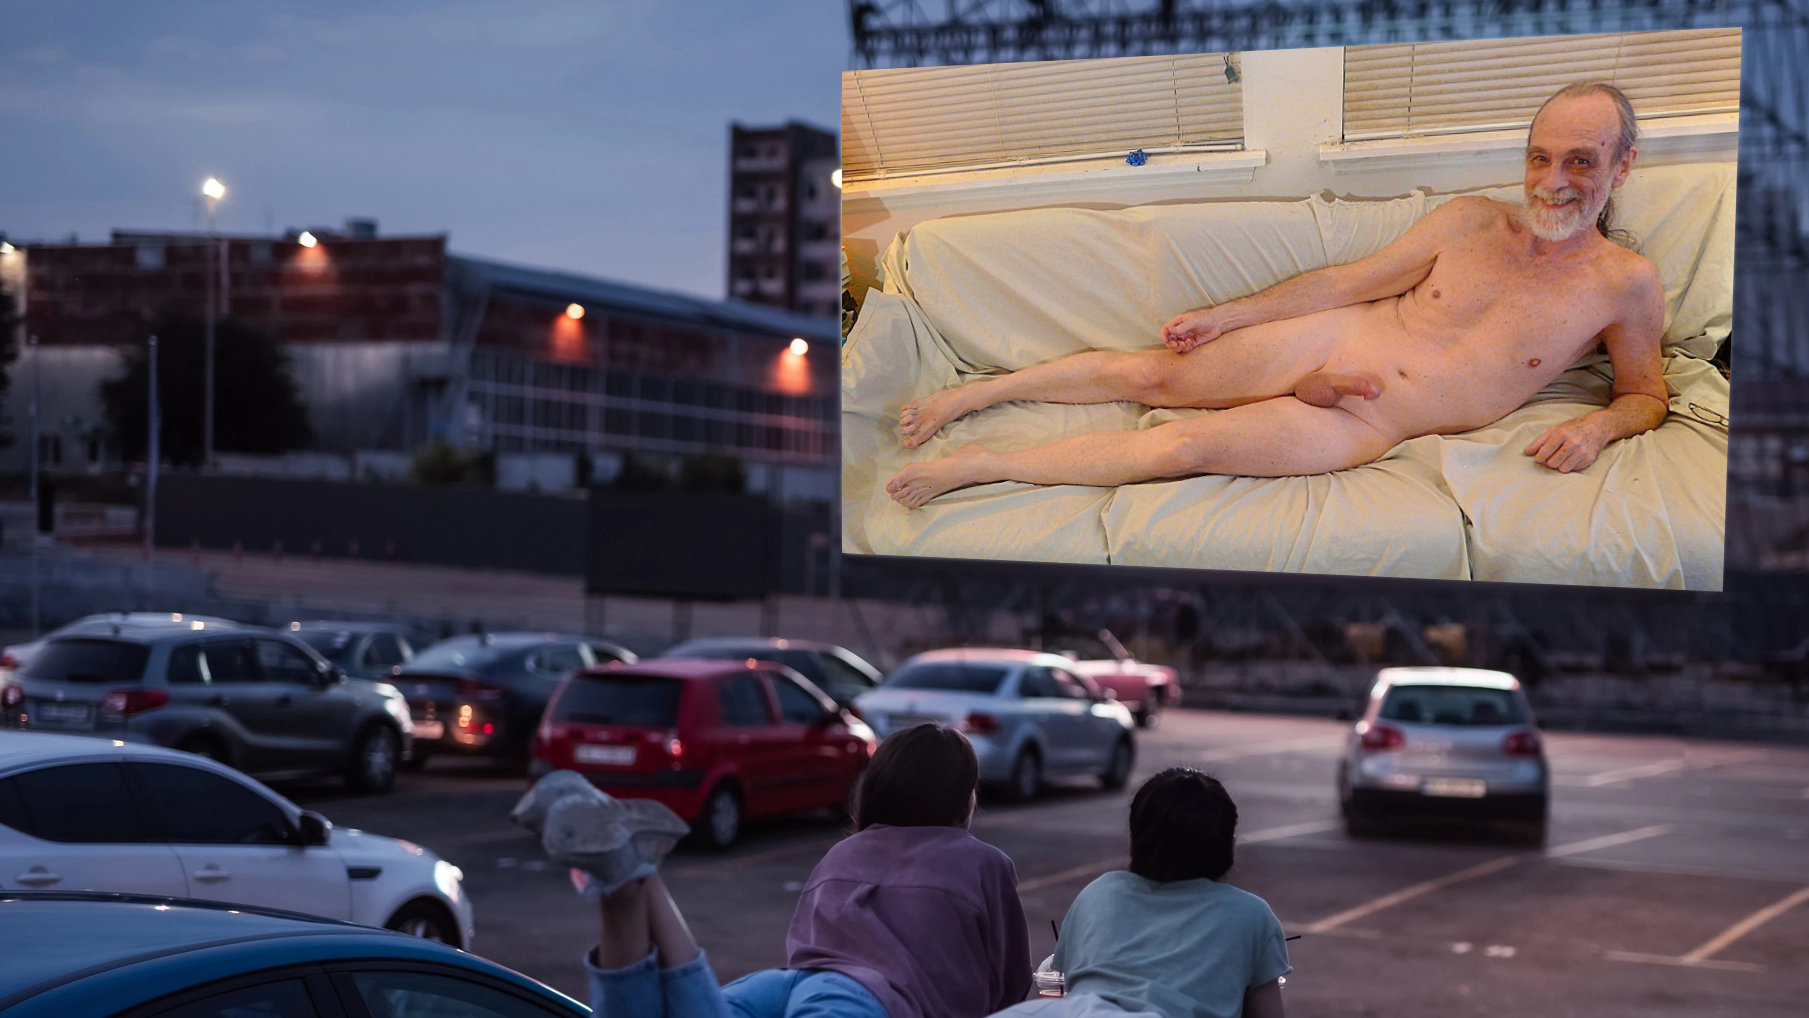 Displayed on the couch with a big erection at the drive-in